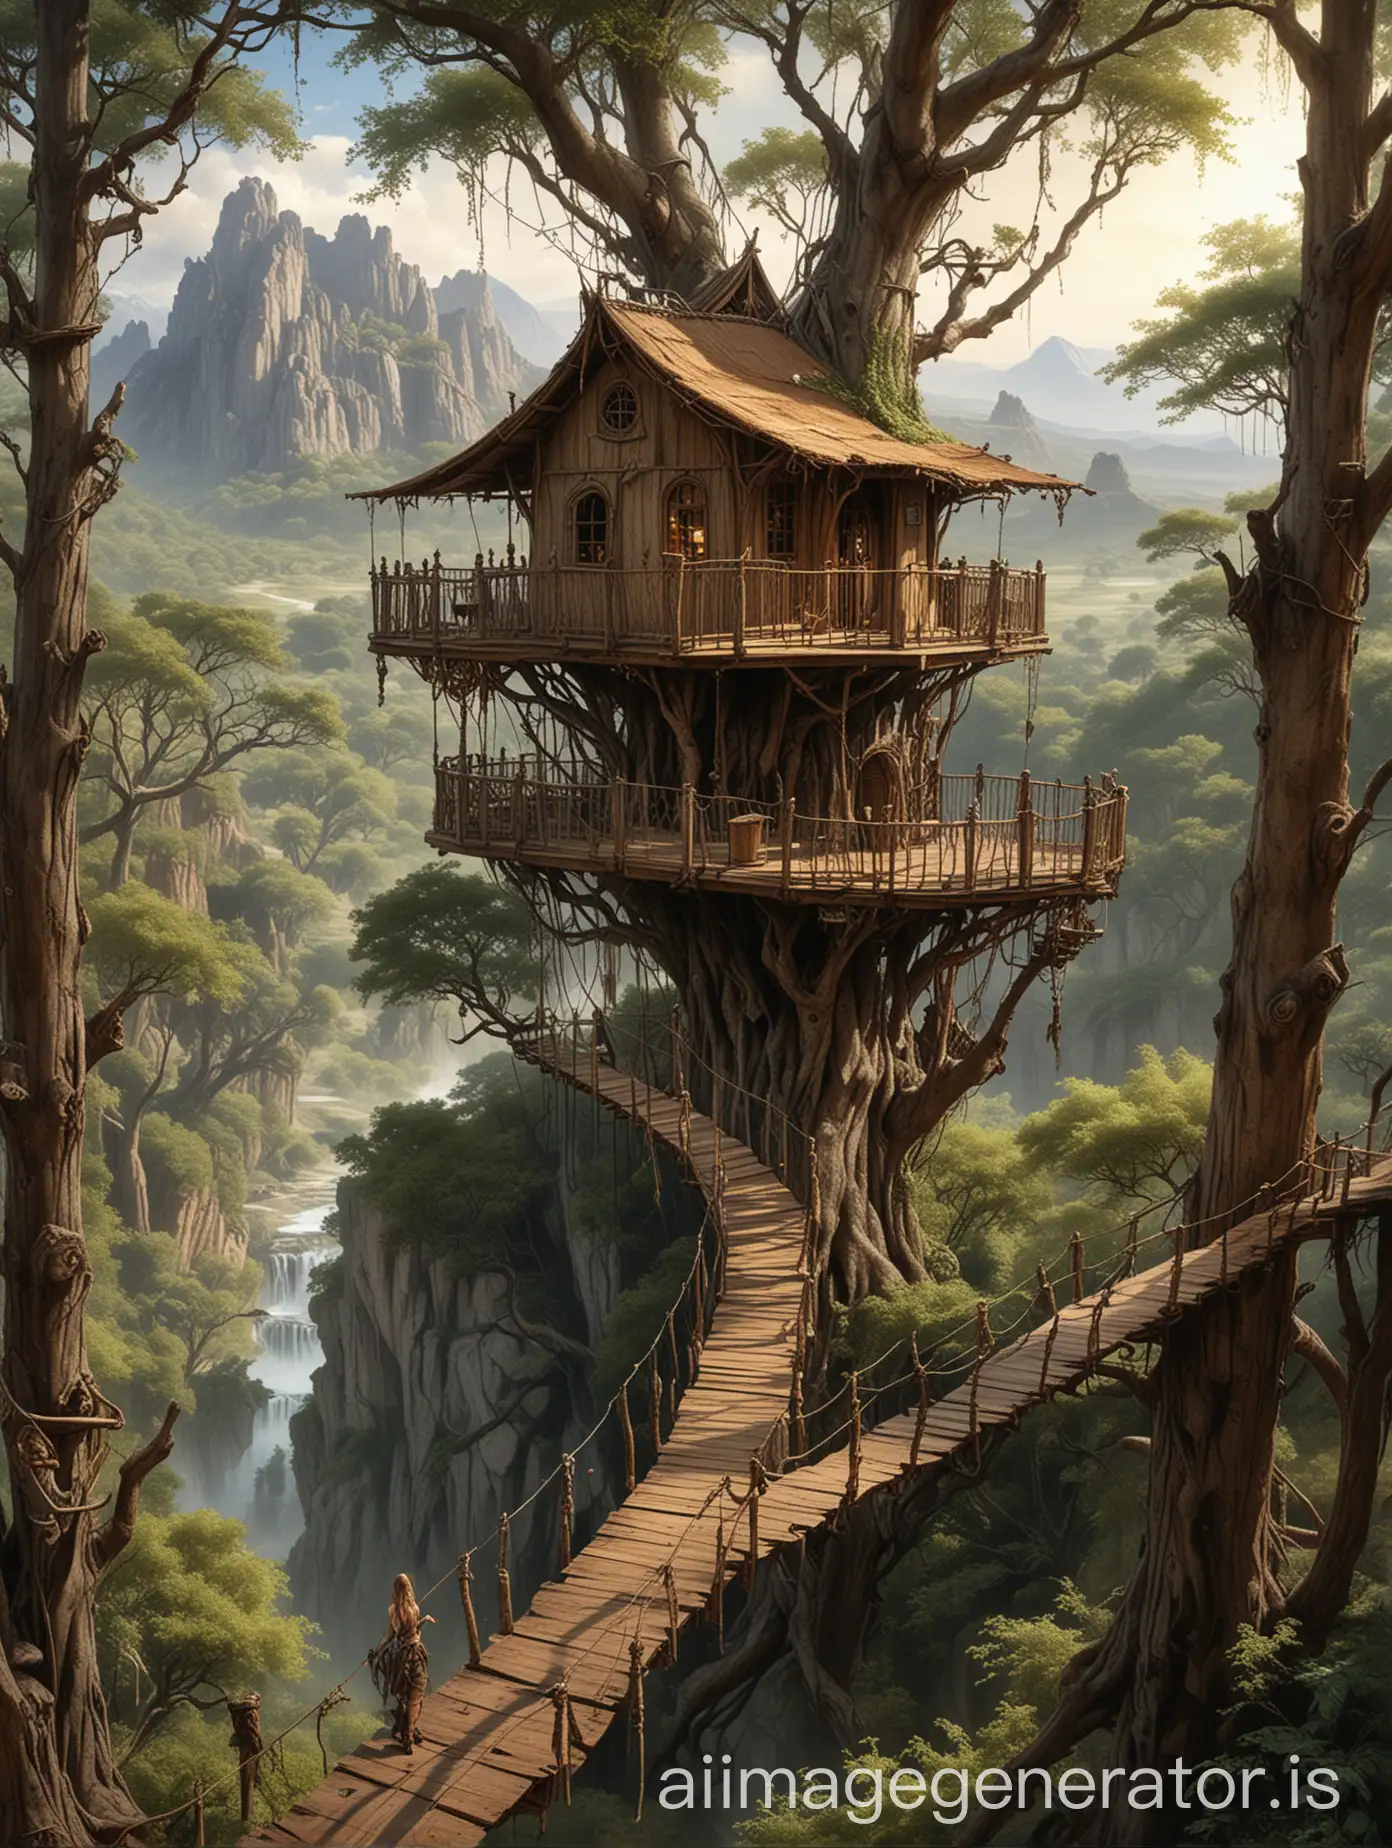 Treehouse-Retreat-with-Rope-Bridge-and-Mountain-View